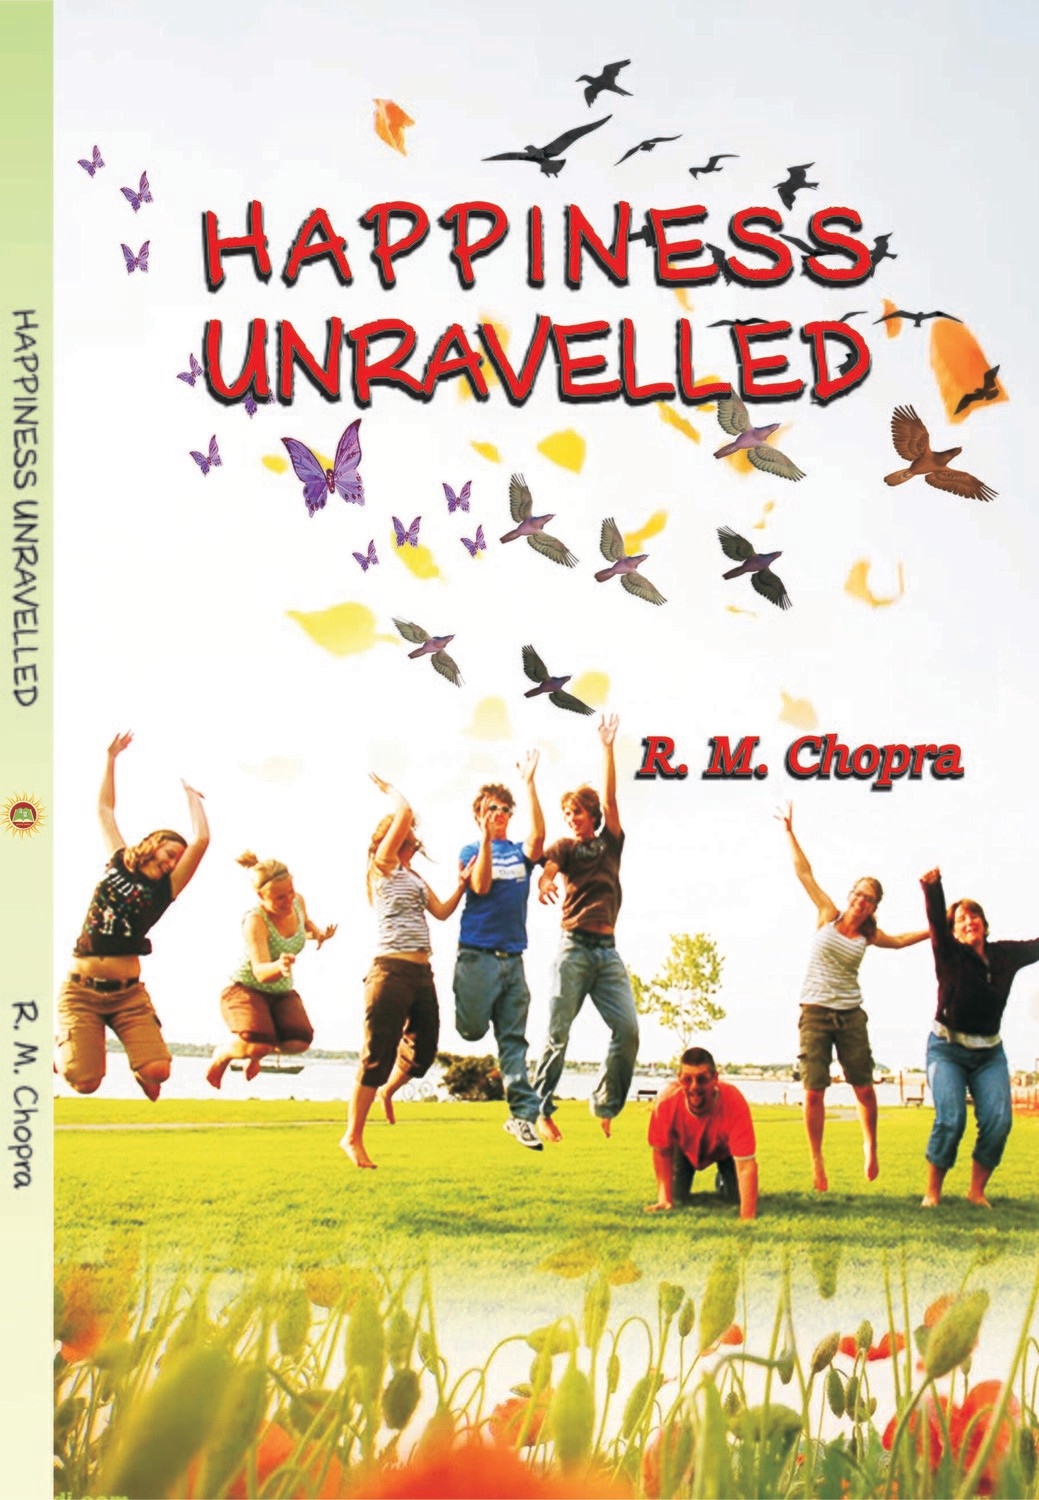 Buy e-book: HAPPINESS UNRAVELLED